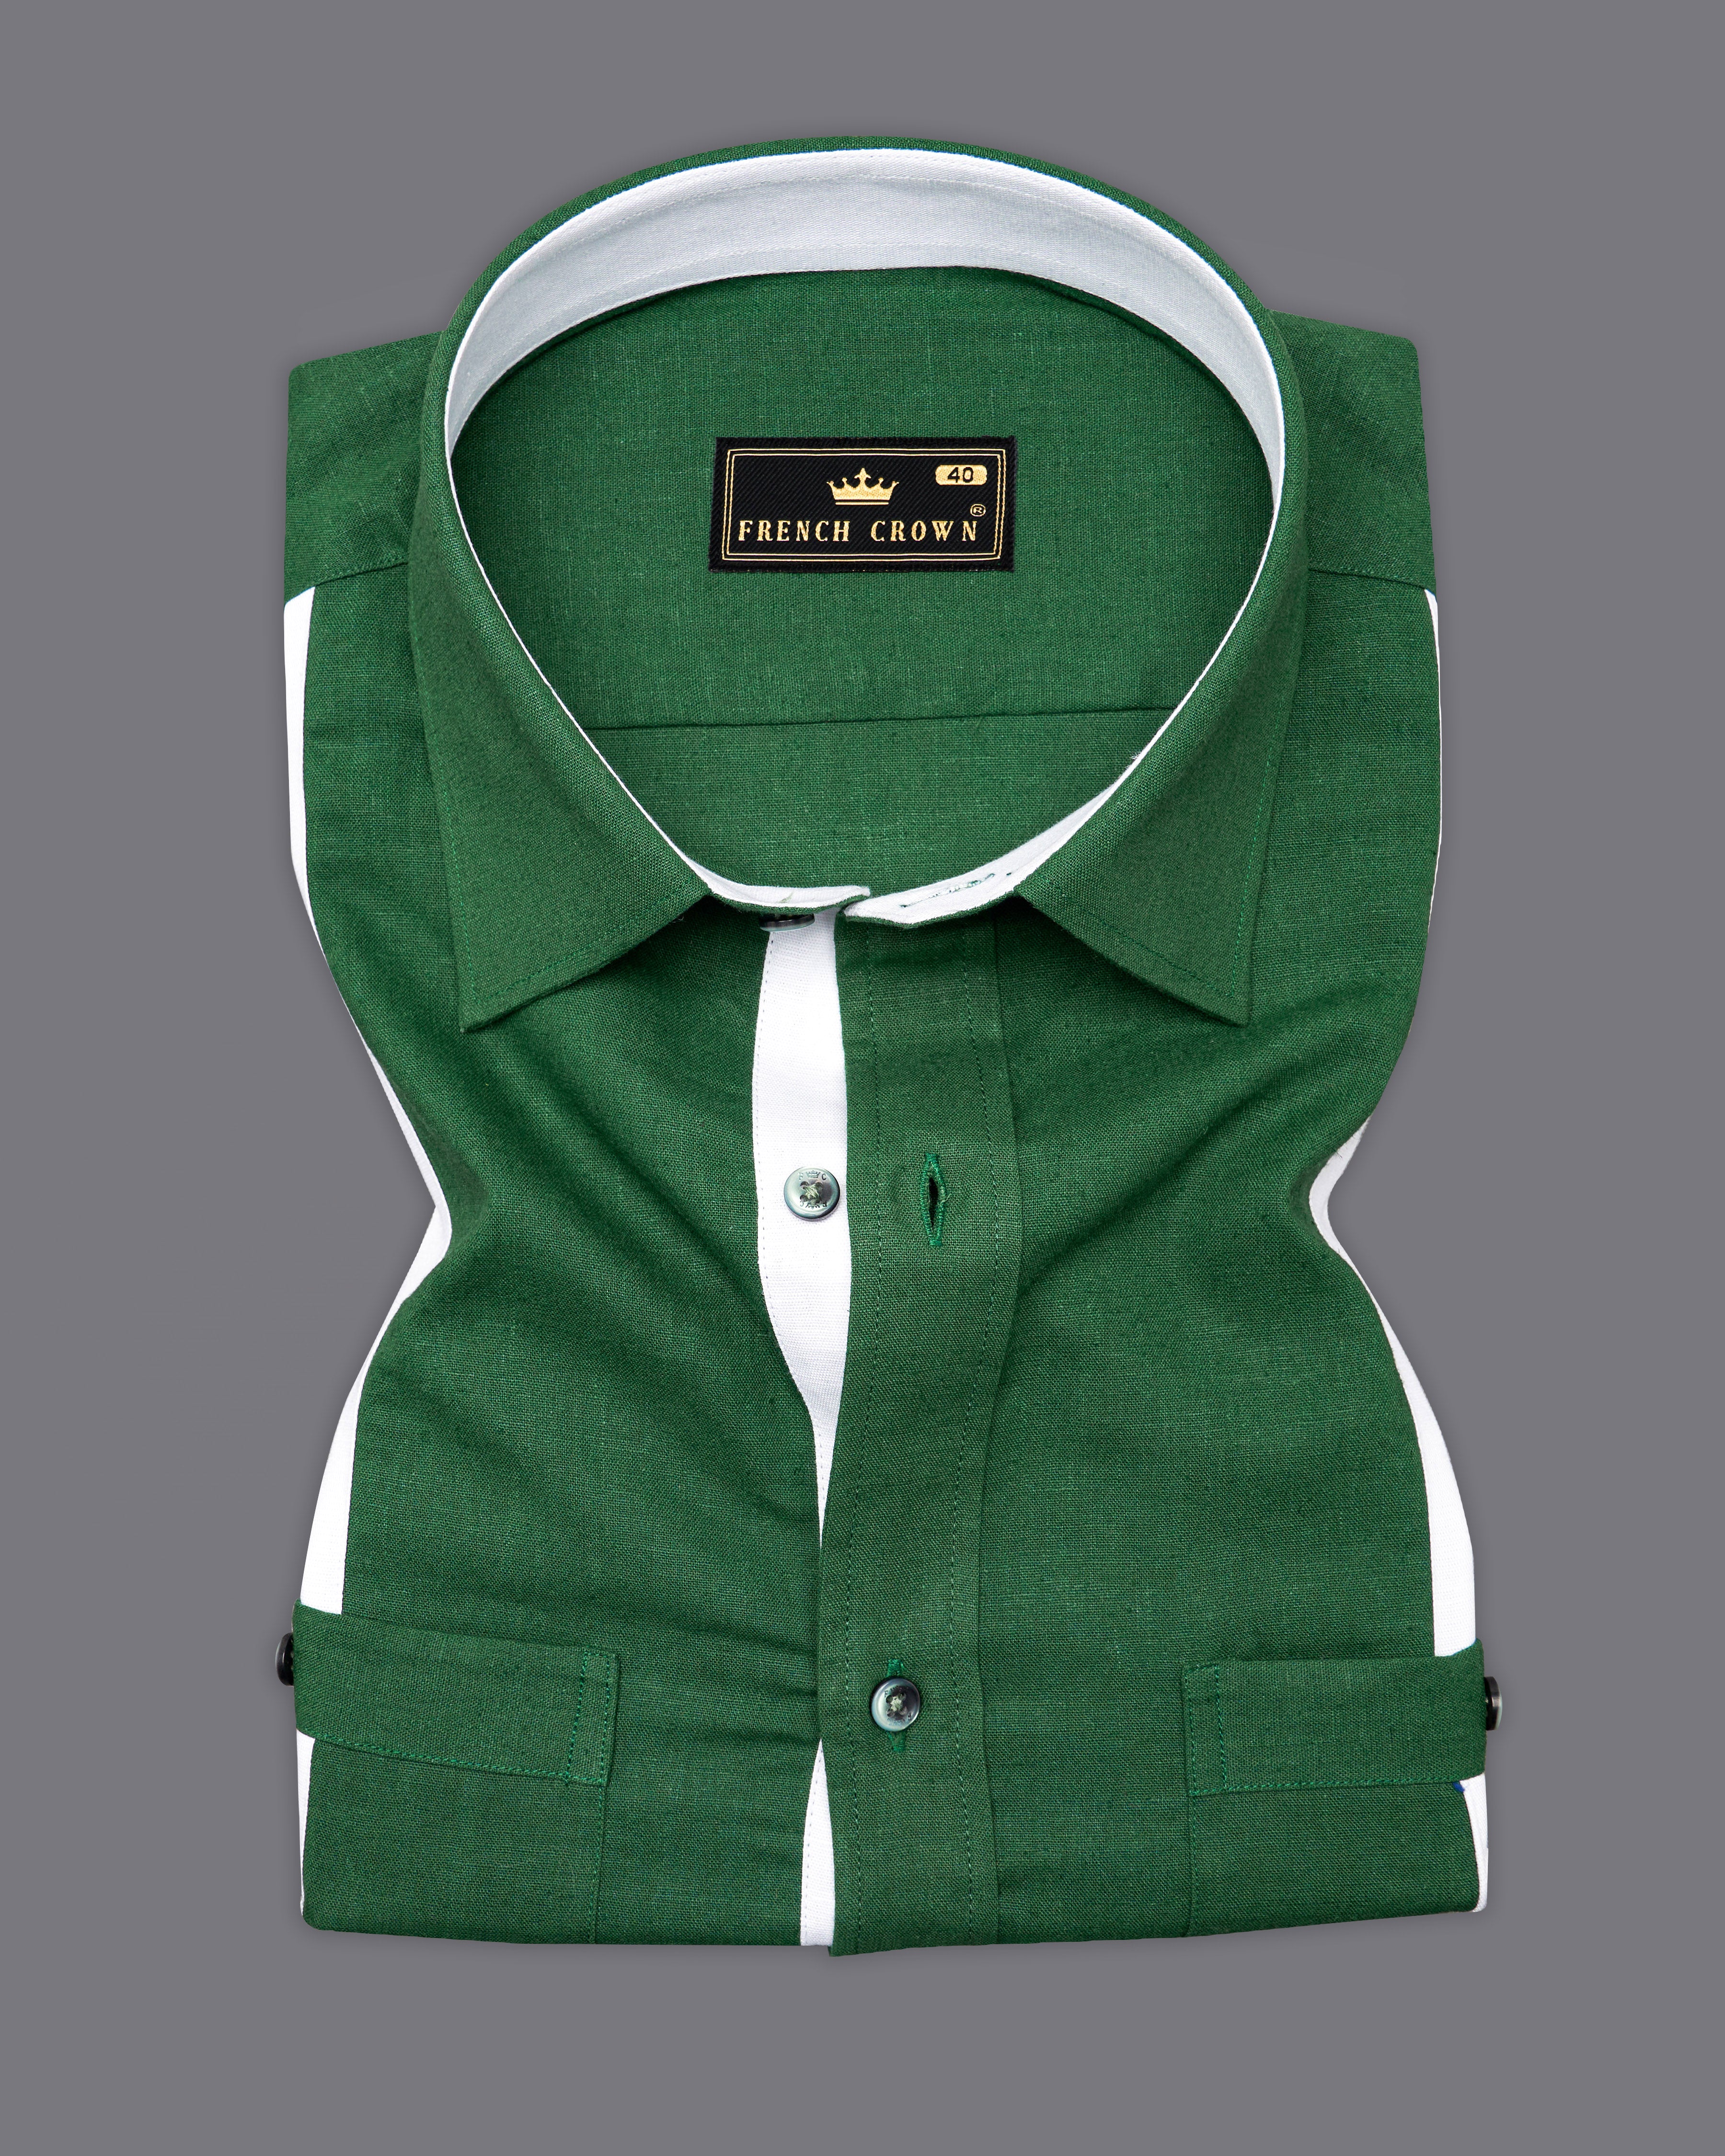 Pantation Green and White Striped Luxurious Linen Designer Shirt 9614-GR-P474-SS-H-38, 9614-GR-P474-SS-H-39, 9614-GR-P474-SS-H-40, 9614-GR-P474-SS-H-42, 9614-GR-P474-SS-H-44, 9614-GR-P474-SS-H-46, 9614-GR-P474-SS-H-48, 9614-GR-P474-SS-H-50, 9614-GR-P474-SS-H-52